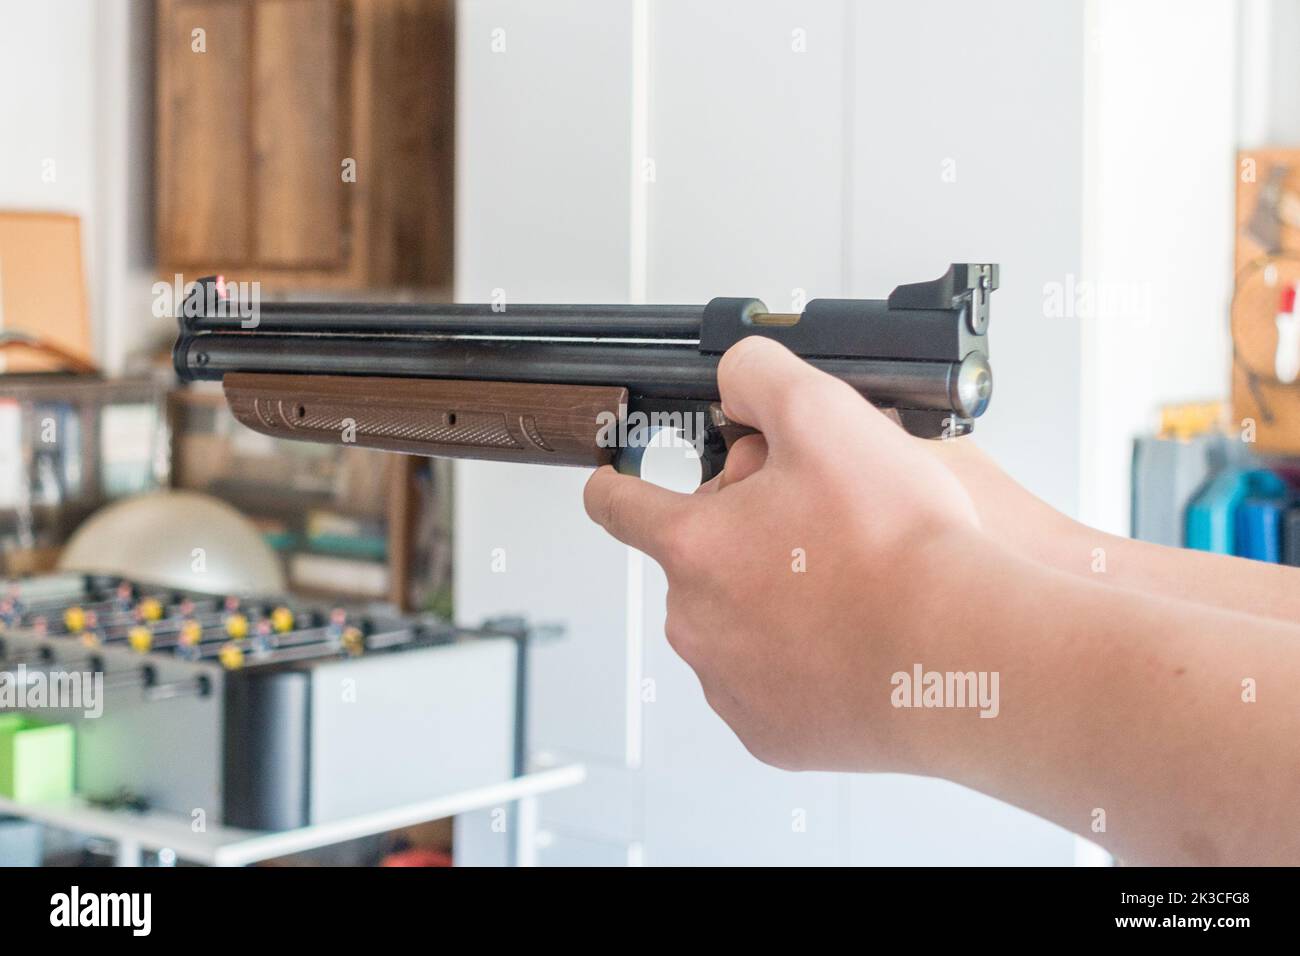 Close up view of a boy's hands holding and aiming an air pistol Stock Photo